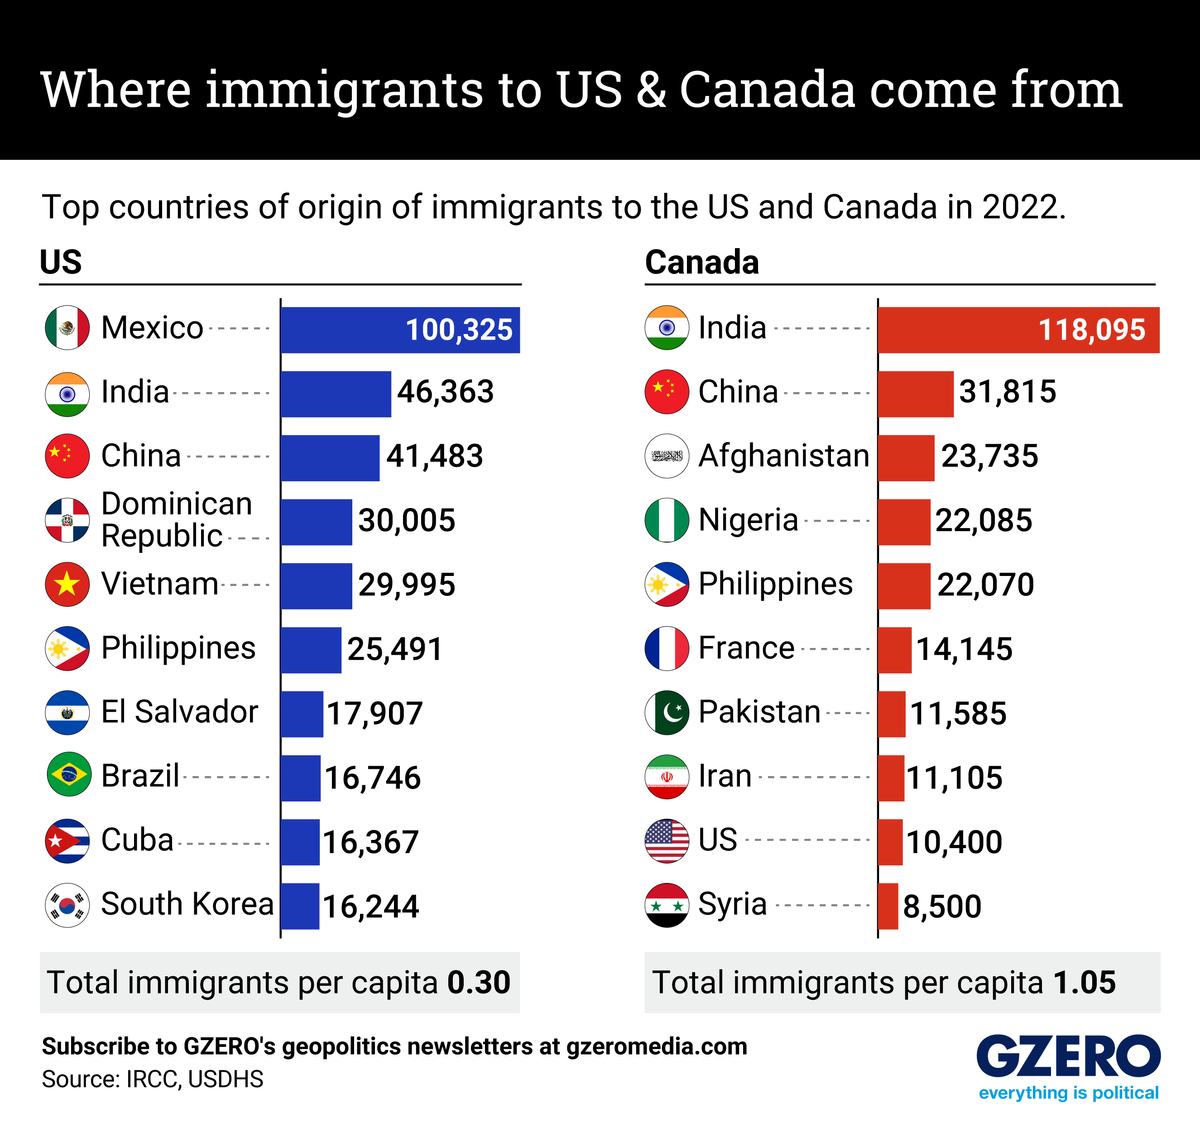 The Graphic Truth: Where immigrants to US & Canada come from